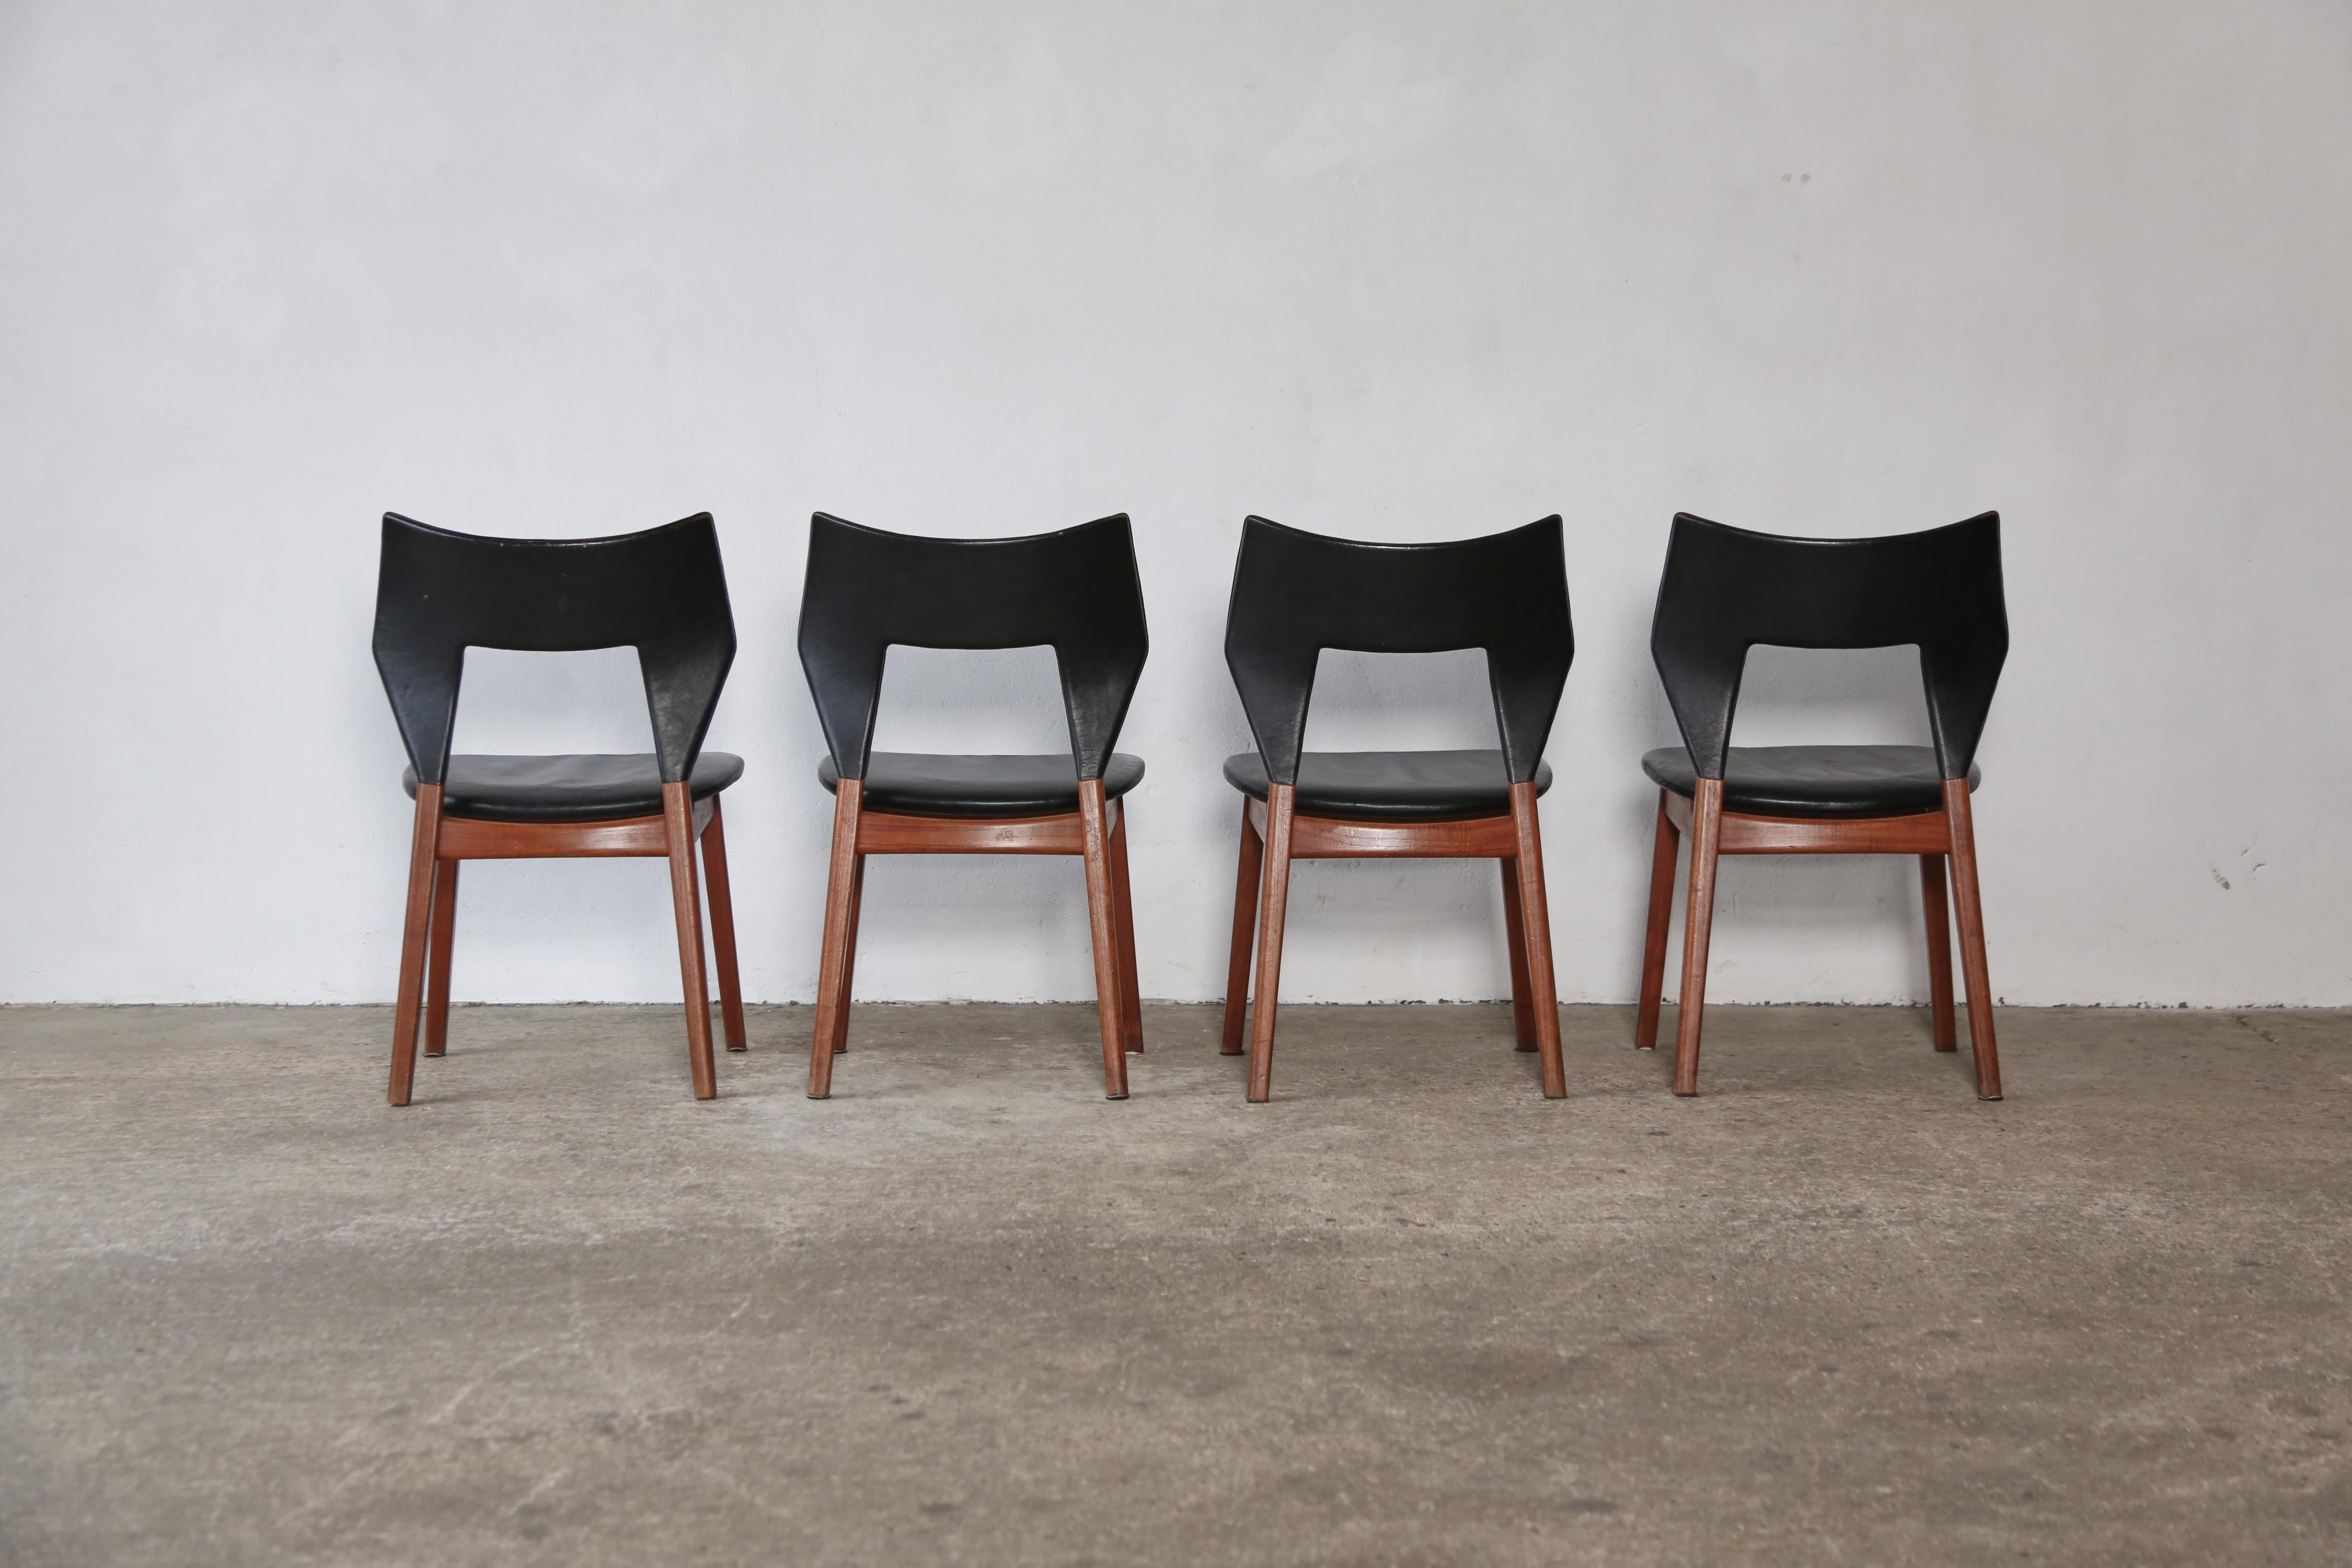 Edvard and Tove Kindt-Larsen Dining Chairs, Thorald Madsens, Denmark, 1950s For Sale 2